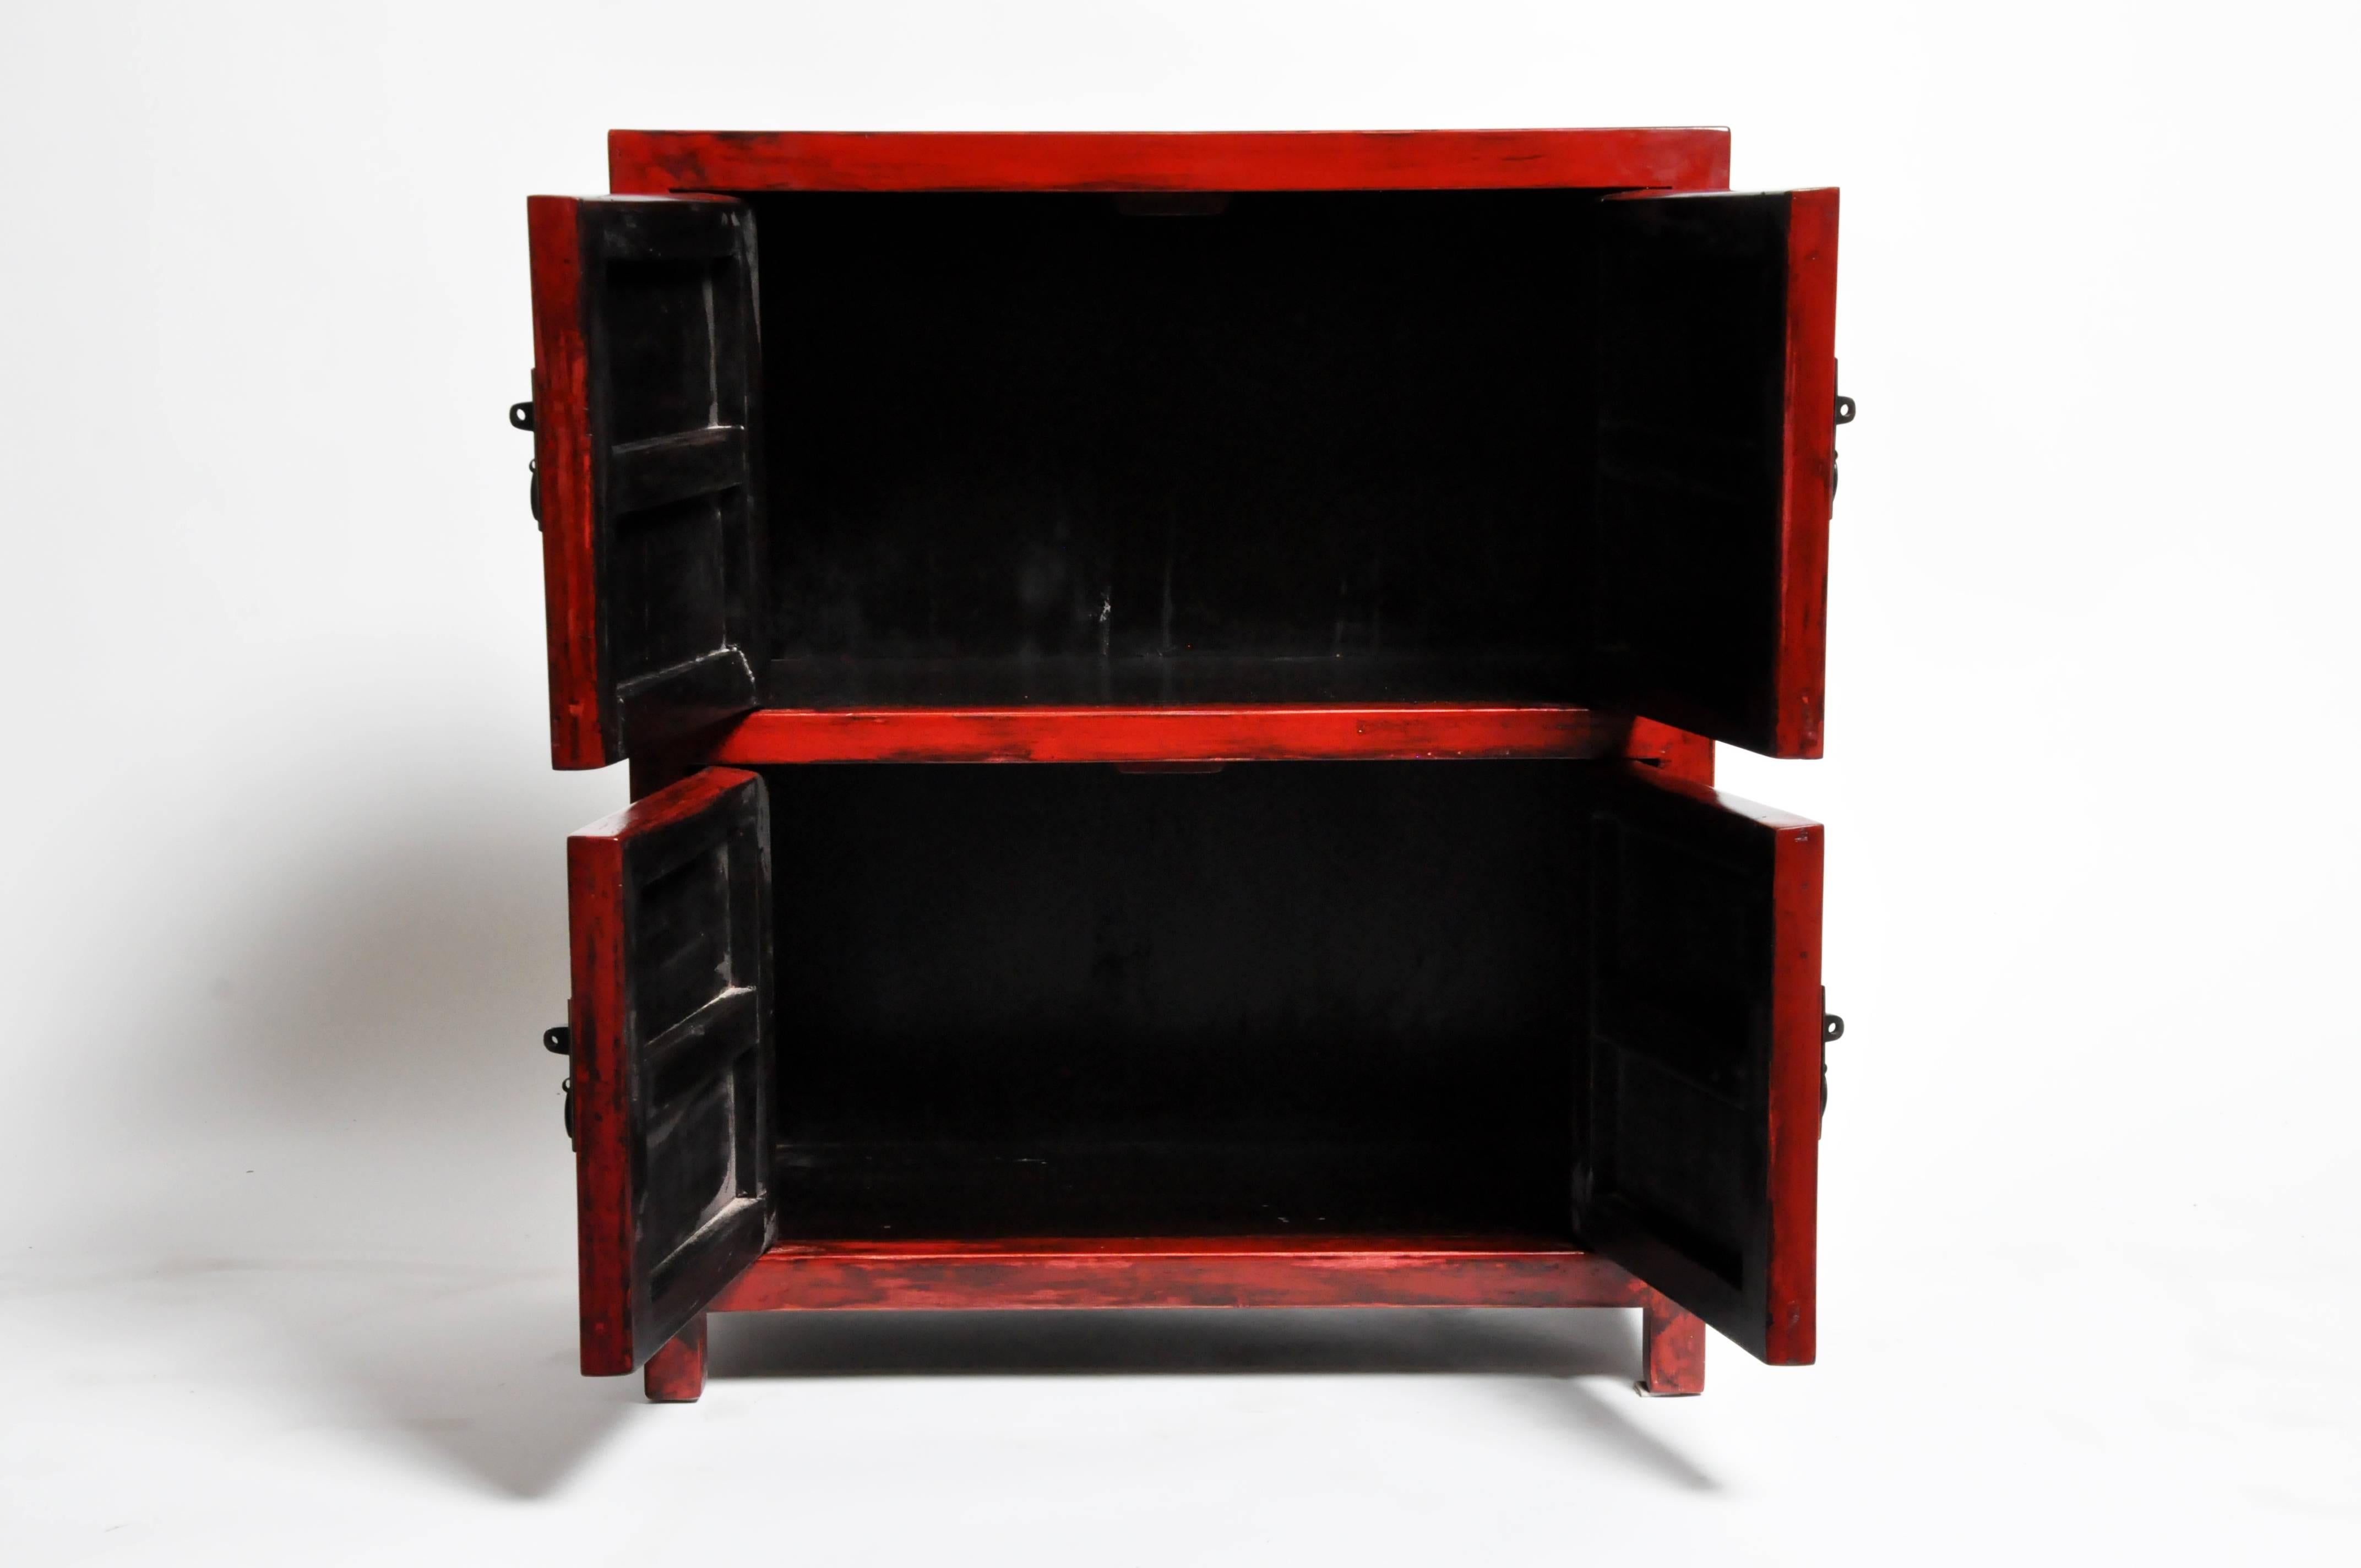 Add a pop of red to any room with this pair of red lacquered side chests from Jiangsu, China. Made from reclaimed elmwood and lacquer the pair features mortise and tenon joinery, and two shelf each. You can also customize a new one and make it your